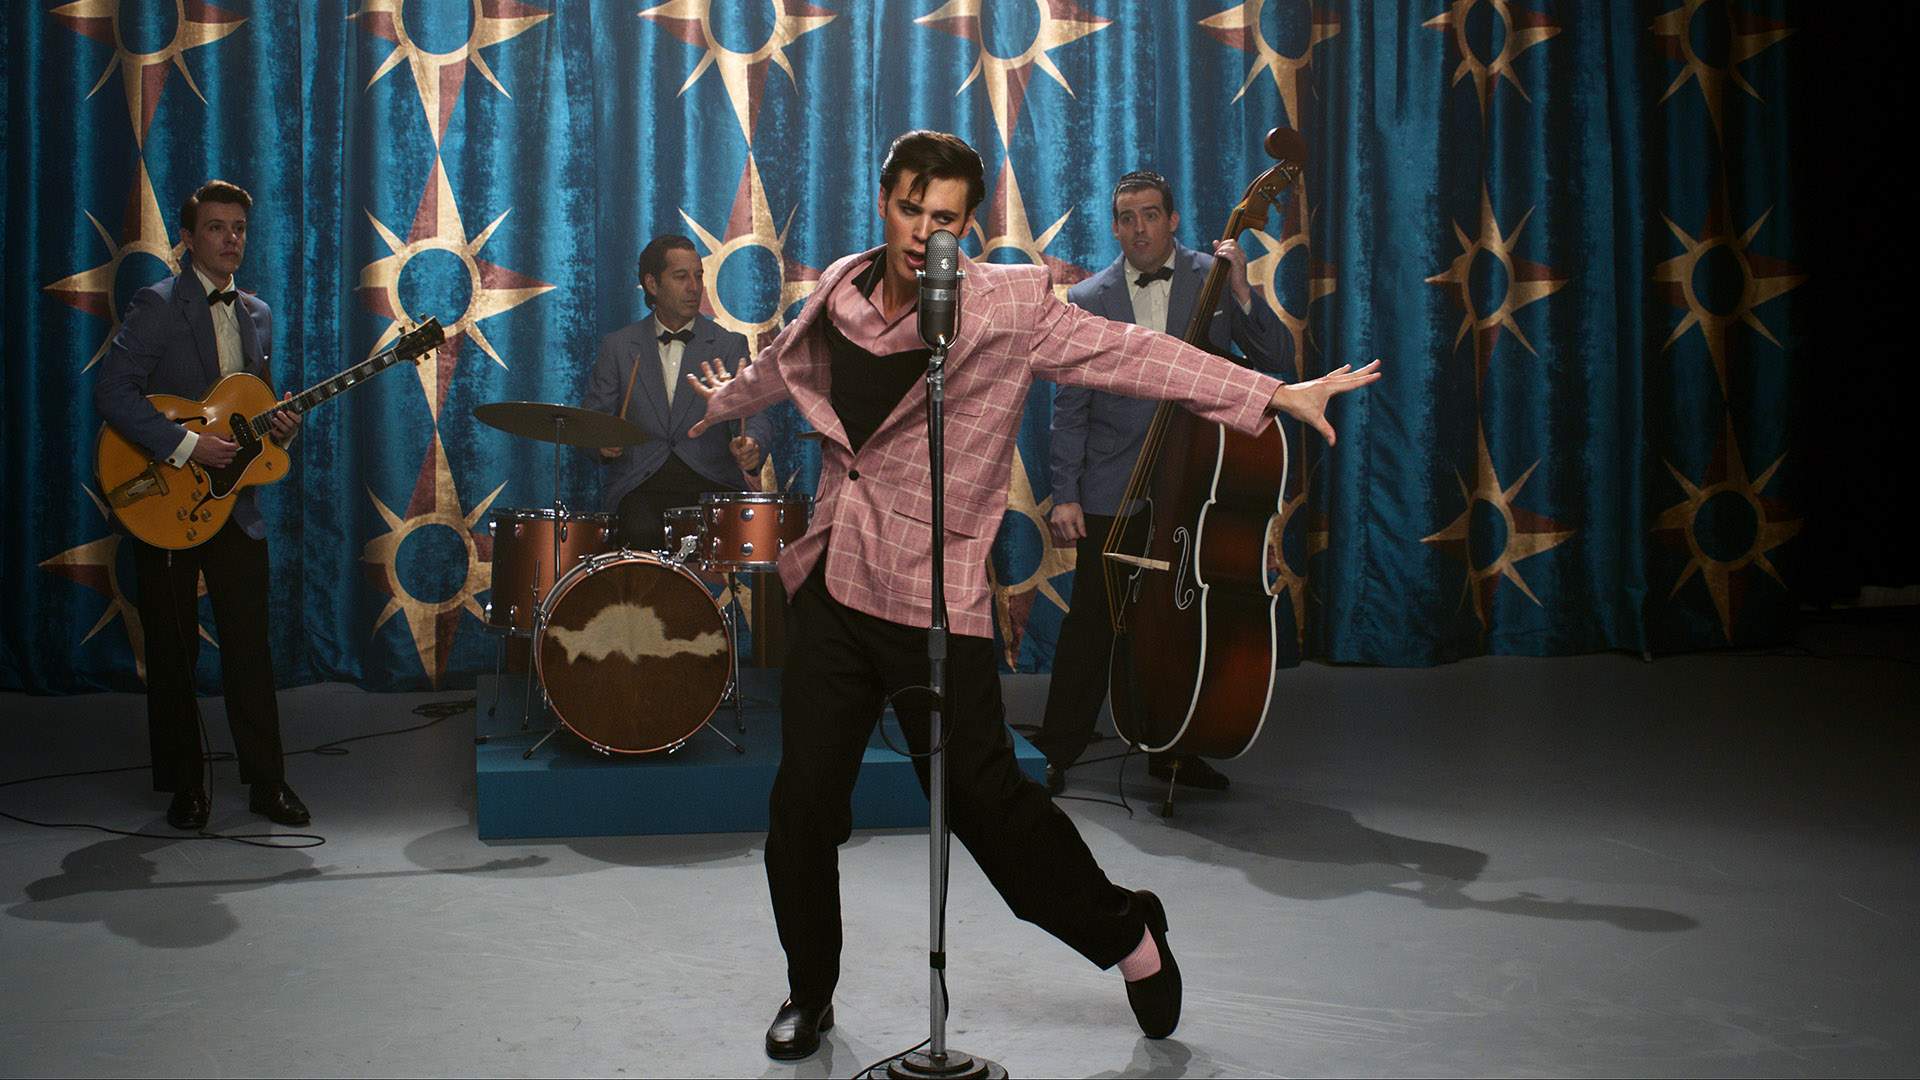 'Elvis' Is in the Building: Baz Luhrmann's Hit Has Been Fast-Tracked to Digital While Still in Cinemas